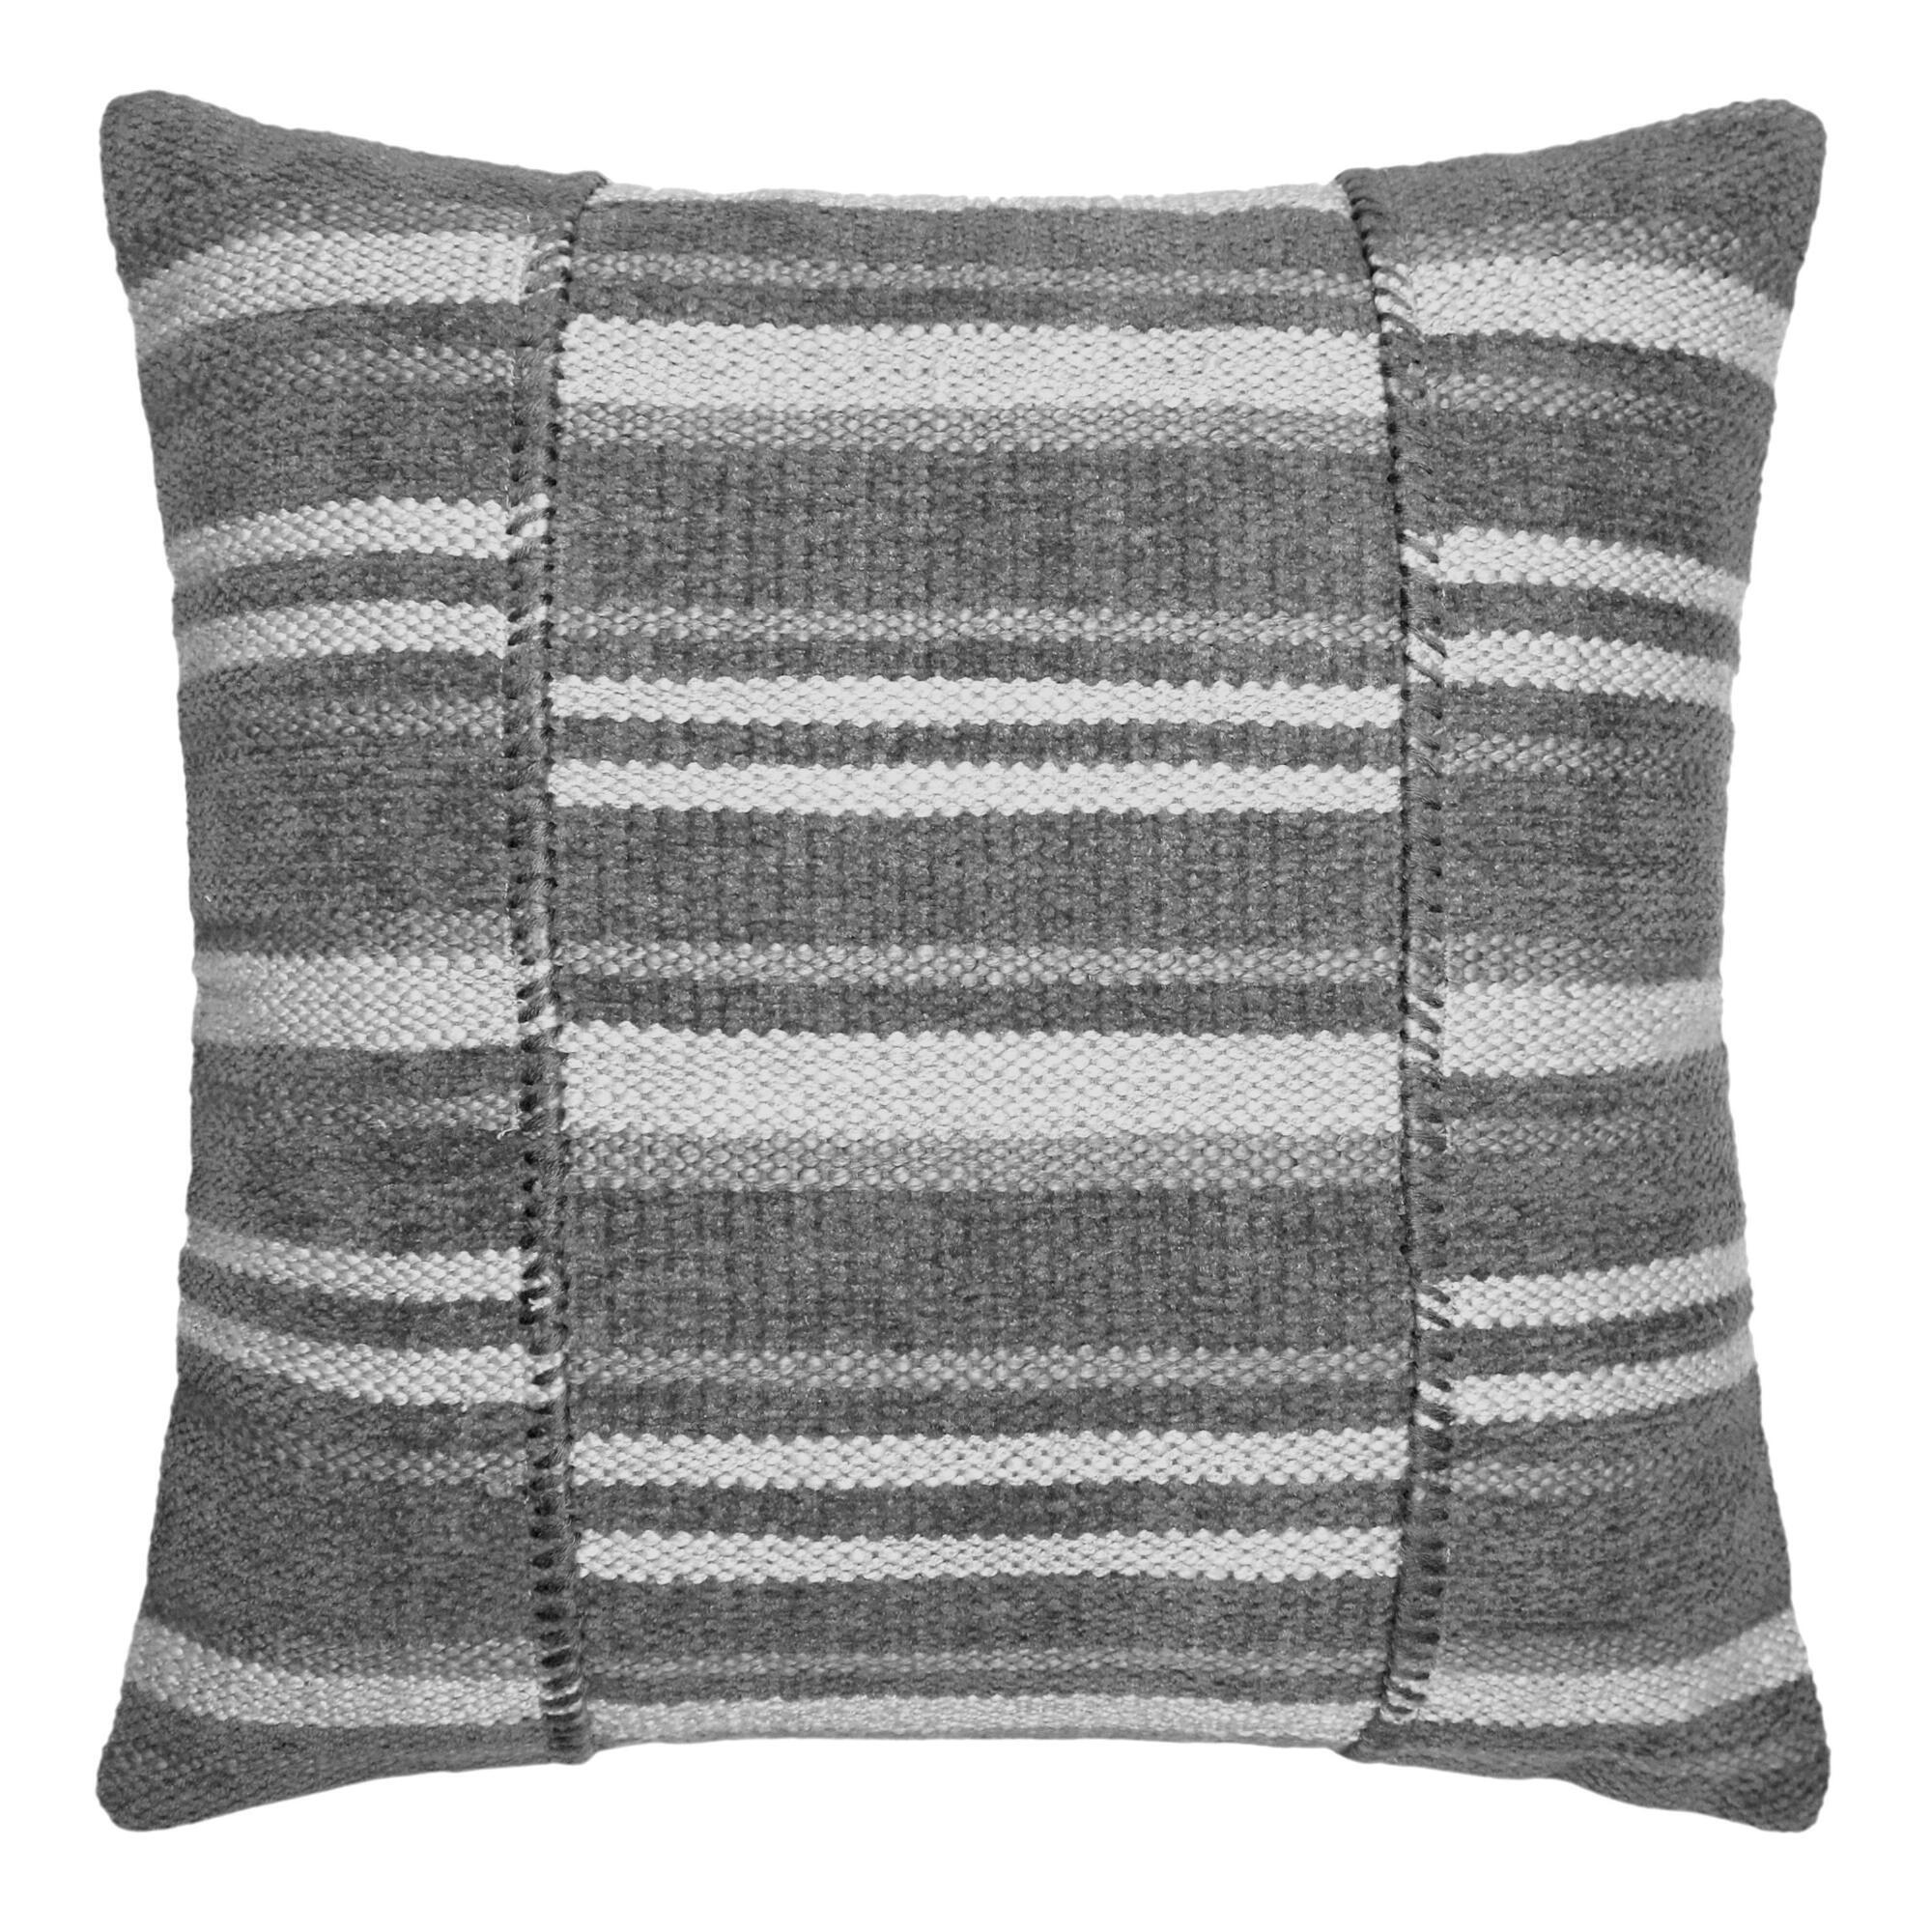 Ladder Stripe Chenille Throw Pillow: Gray - Cotton - 18" Square by World Market